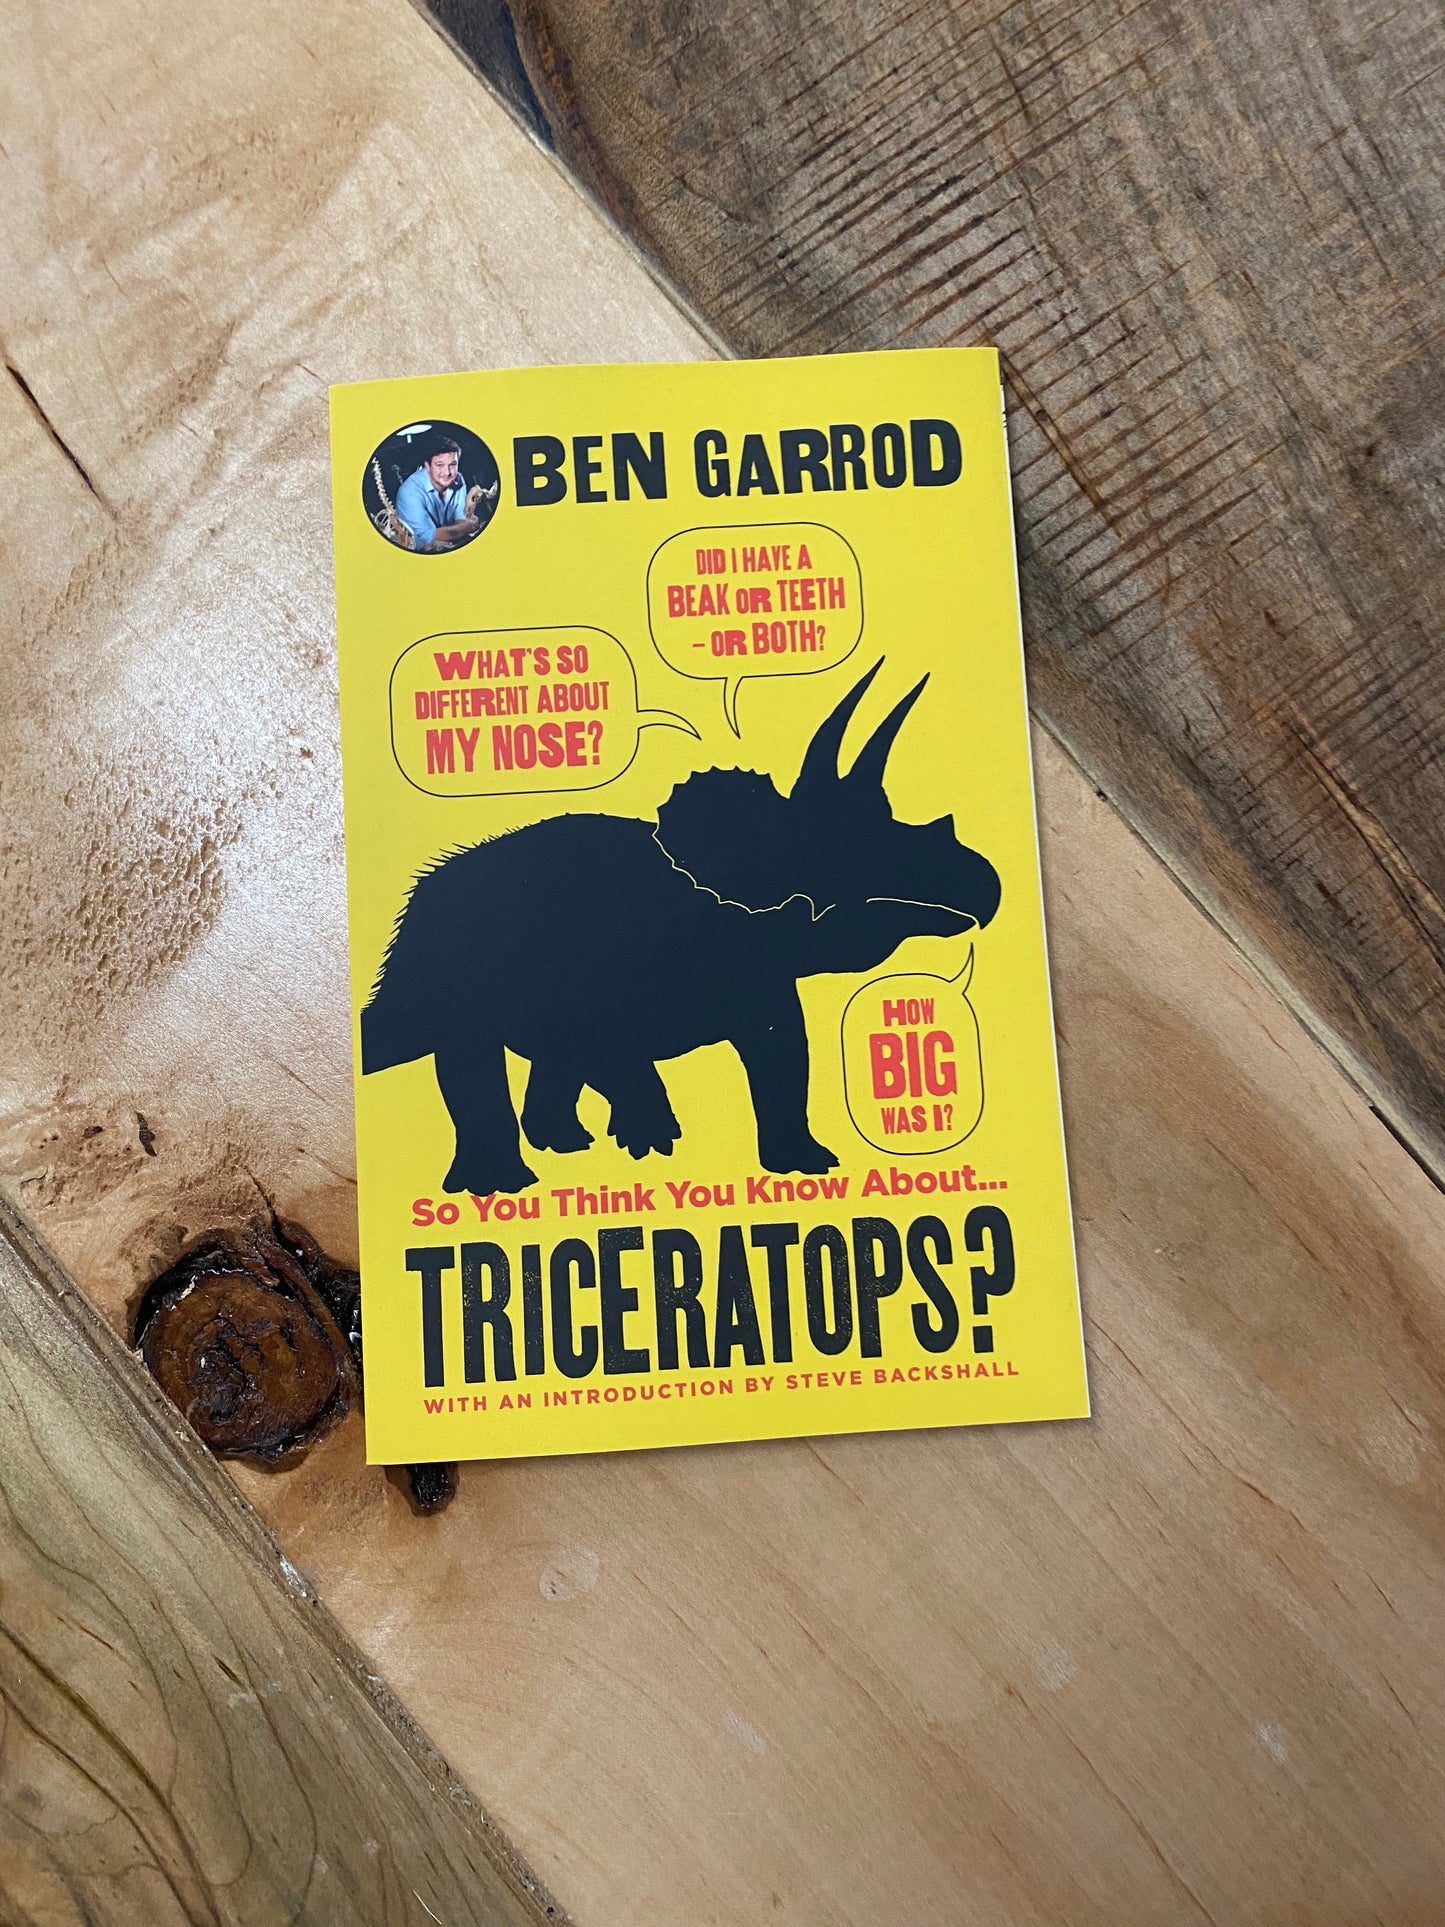 So you think you know about triceratops